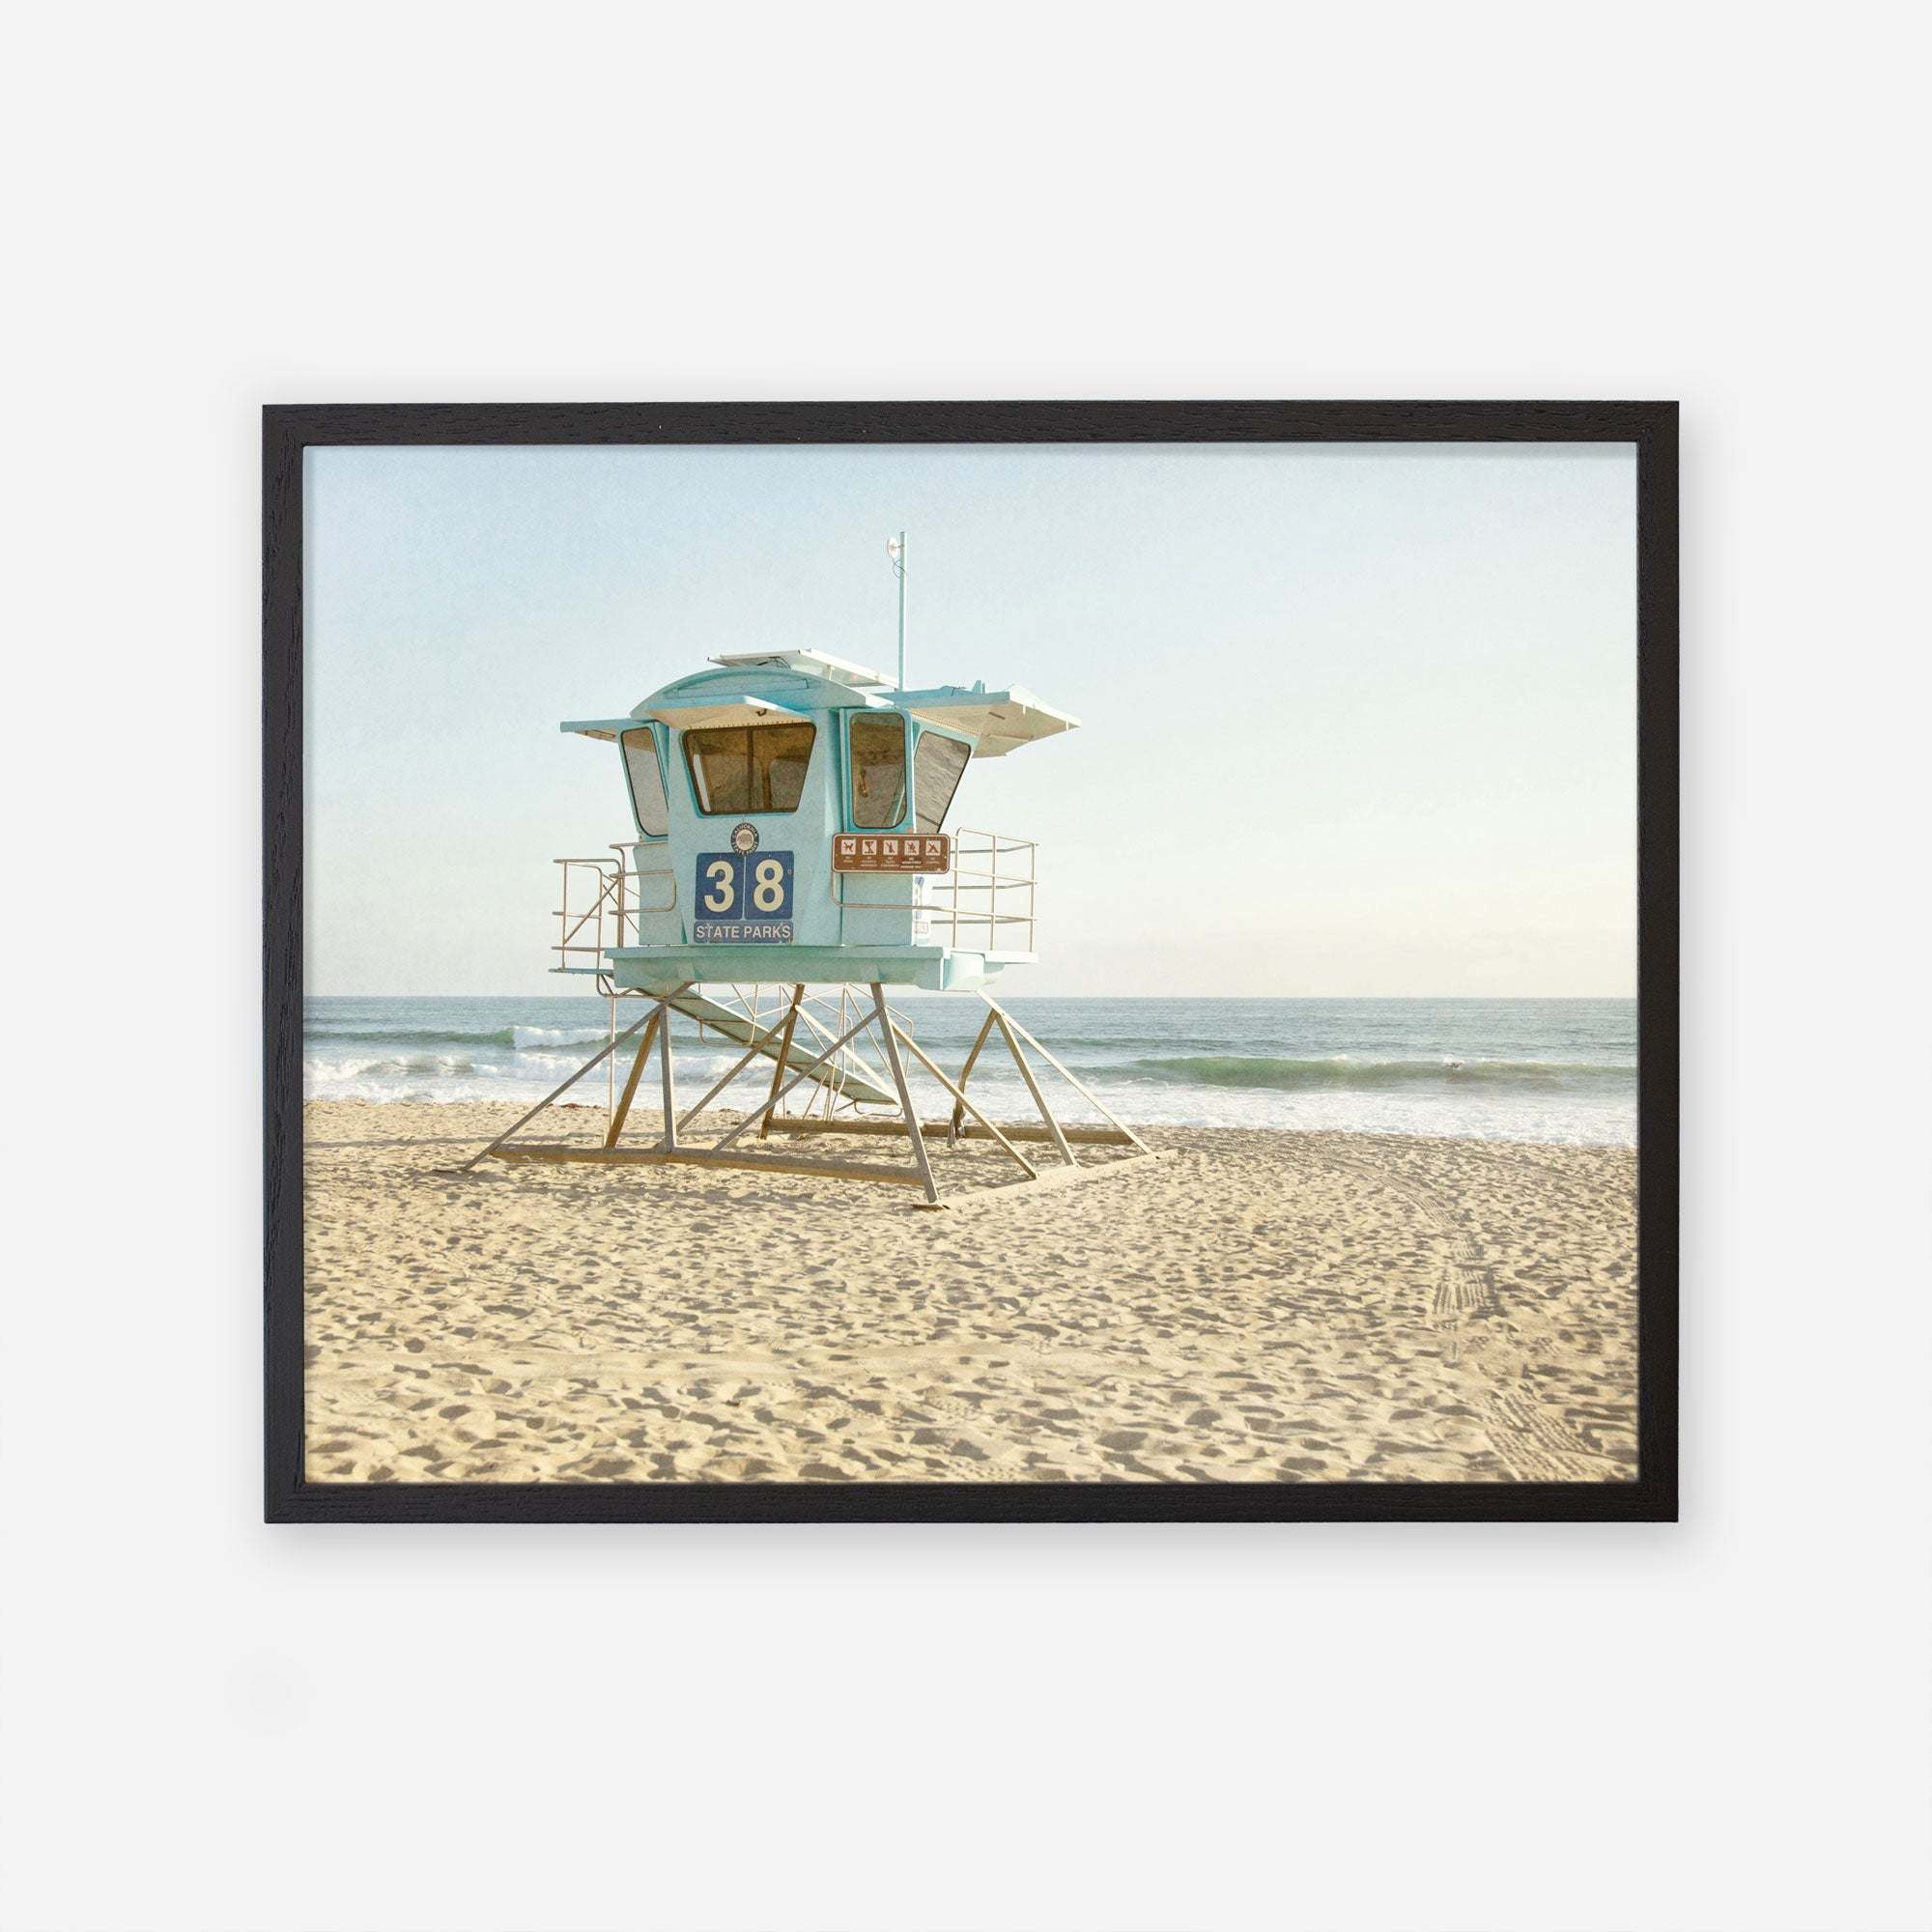 An unframed California Coastal Print of &#39;Carlsbad Lifeguard Tower&#39; on a sandy beach, with calm ocean waves in the background under a clear sky by Offley Green.